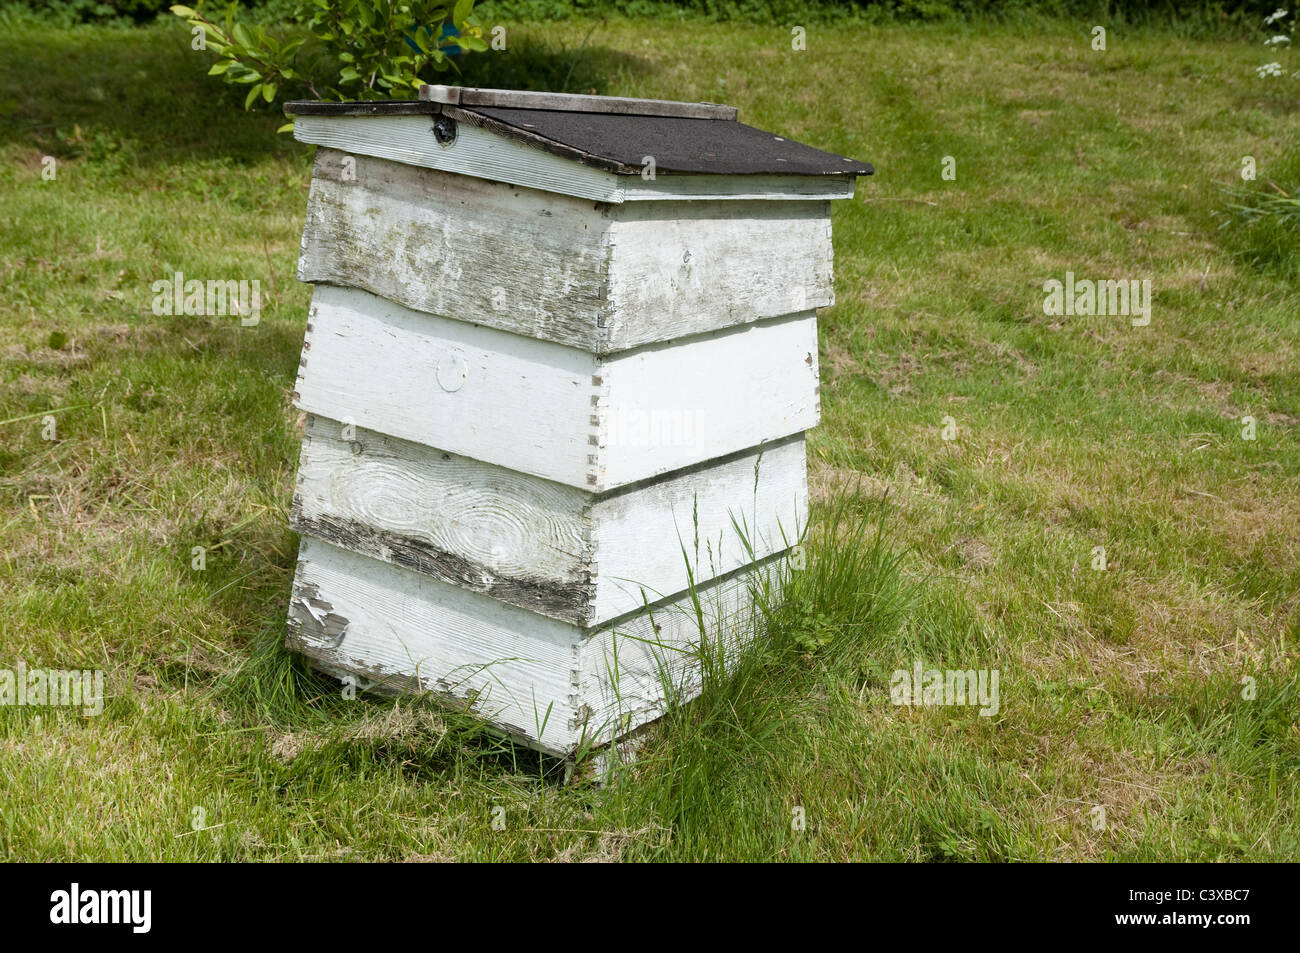 Wooden Bee Hive - traditional shape - white painted and weathered wood. UK Stock Photo